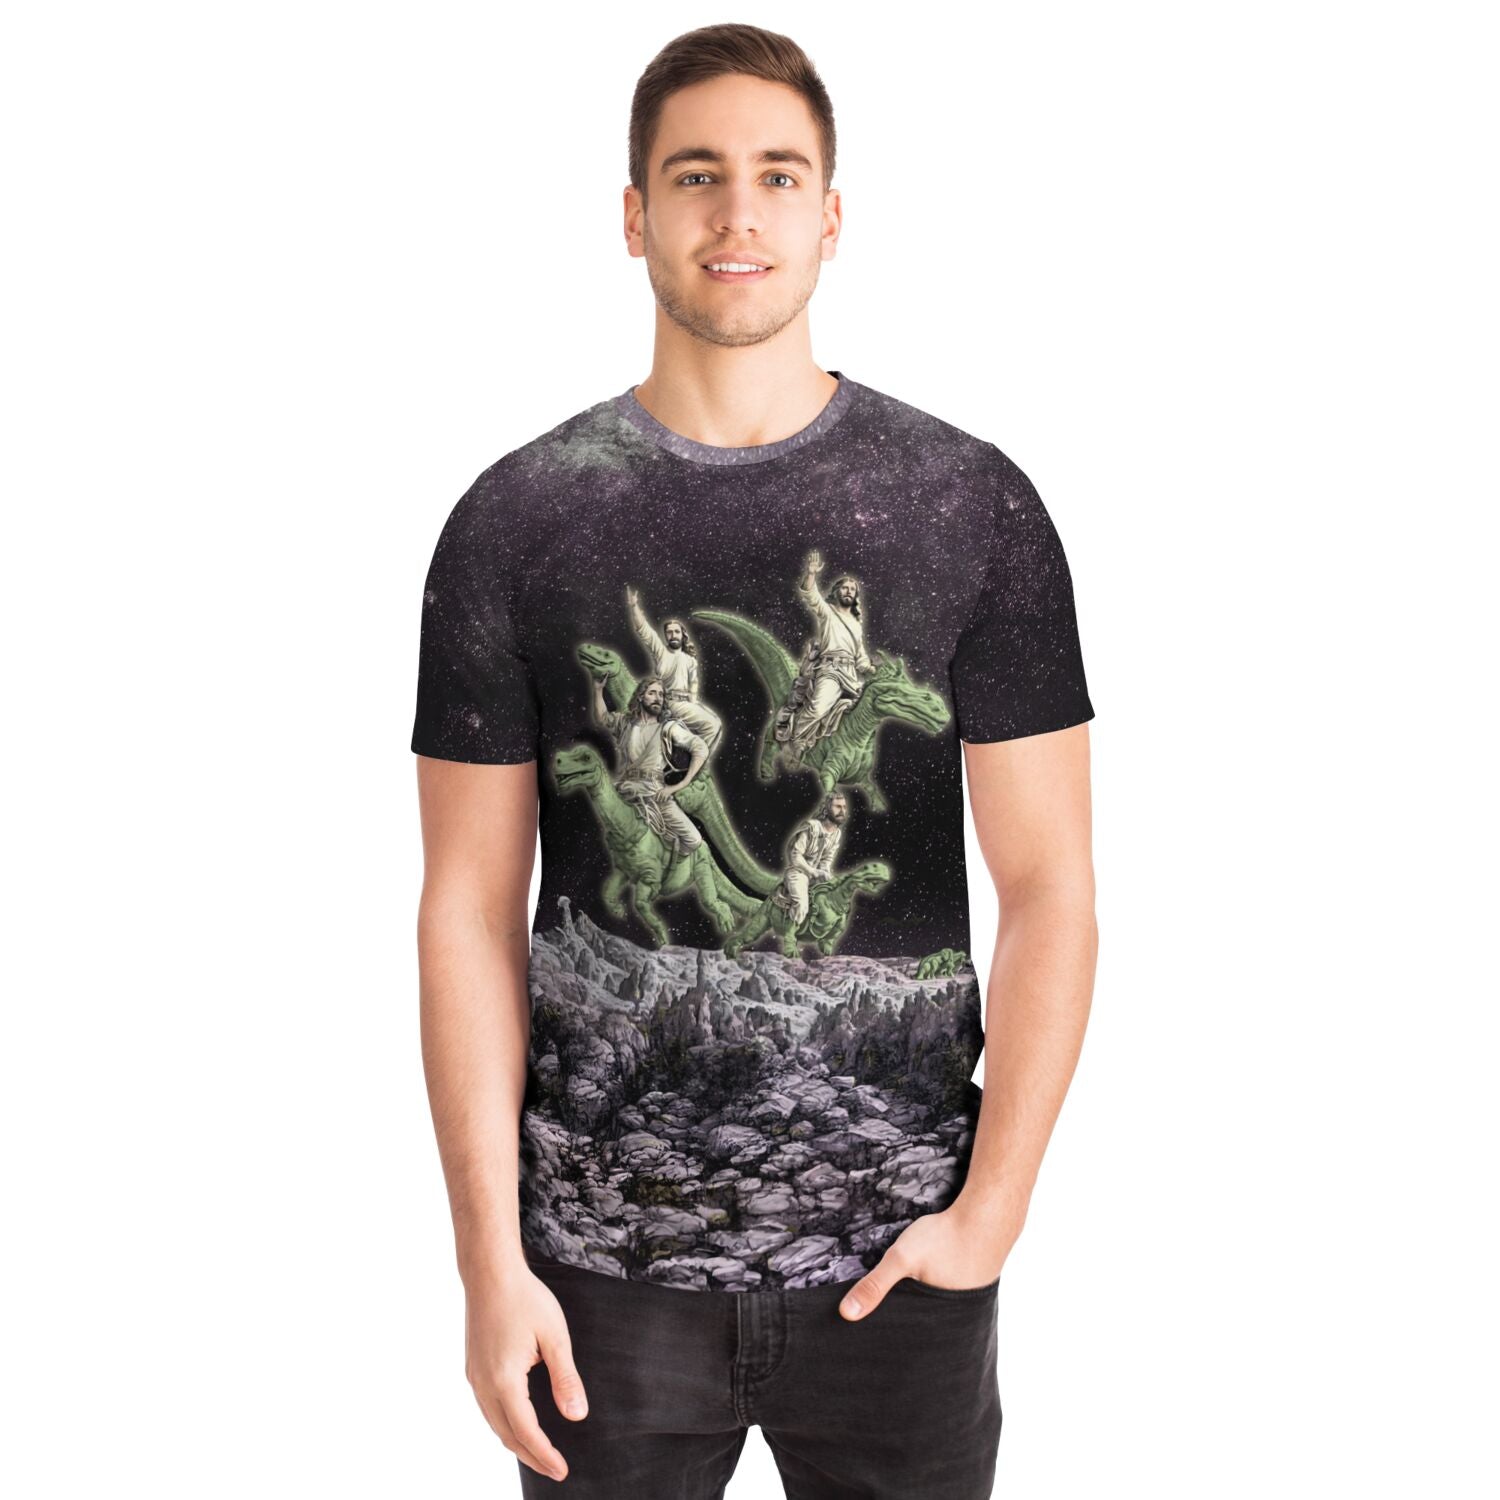 T-shirt Disco Jesus and the Dinosaurs Funny Fantasy Atheist Tee | Surreal Galaxy Collage Graphic Art T-Shirt